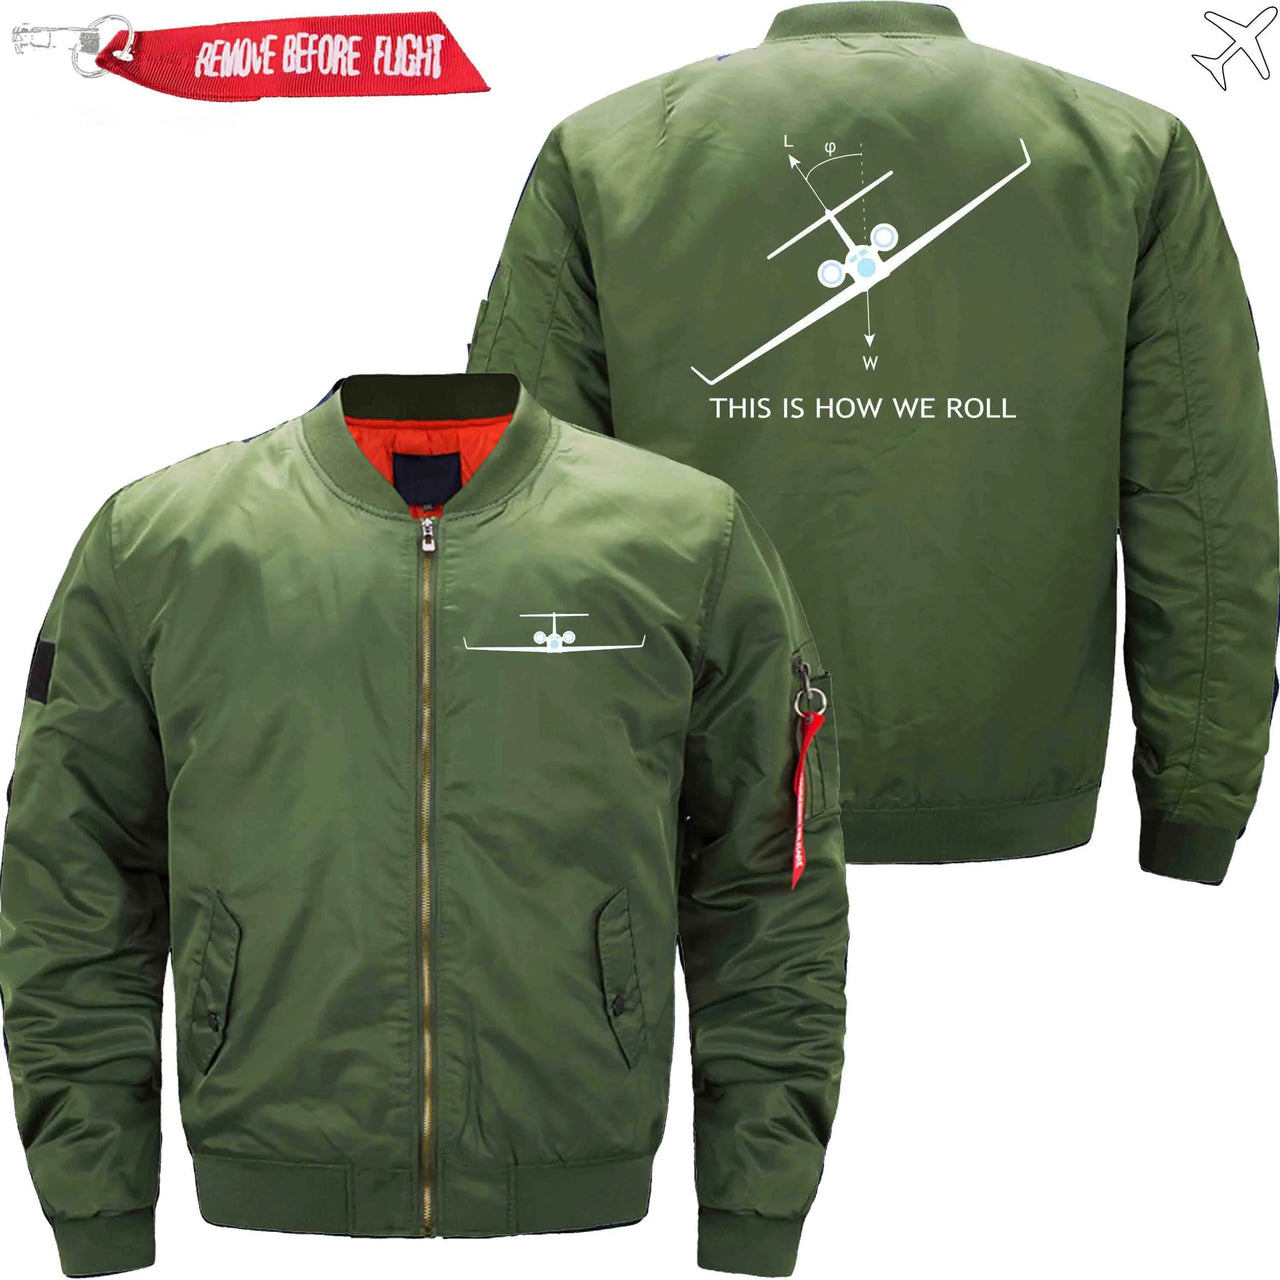 THIS HOW WE ROLL AIRPLANE PILOT JACKET THE AV8R